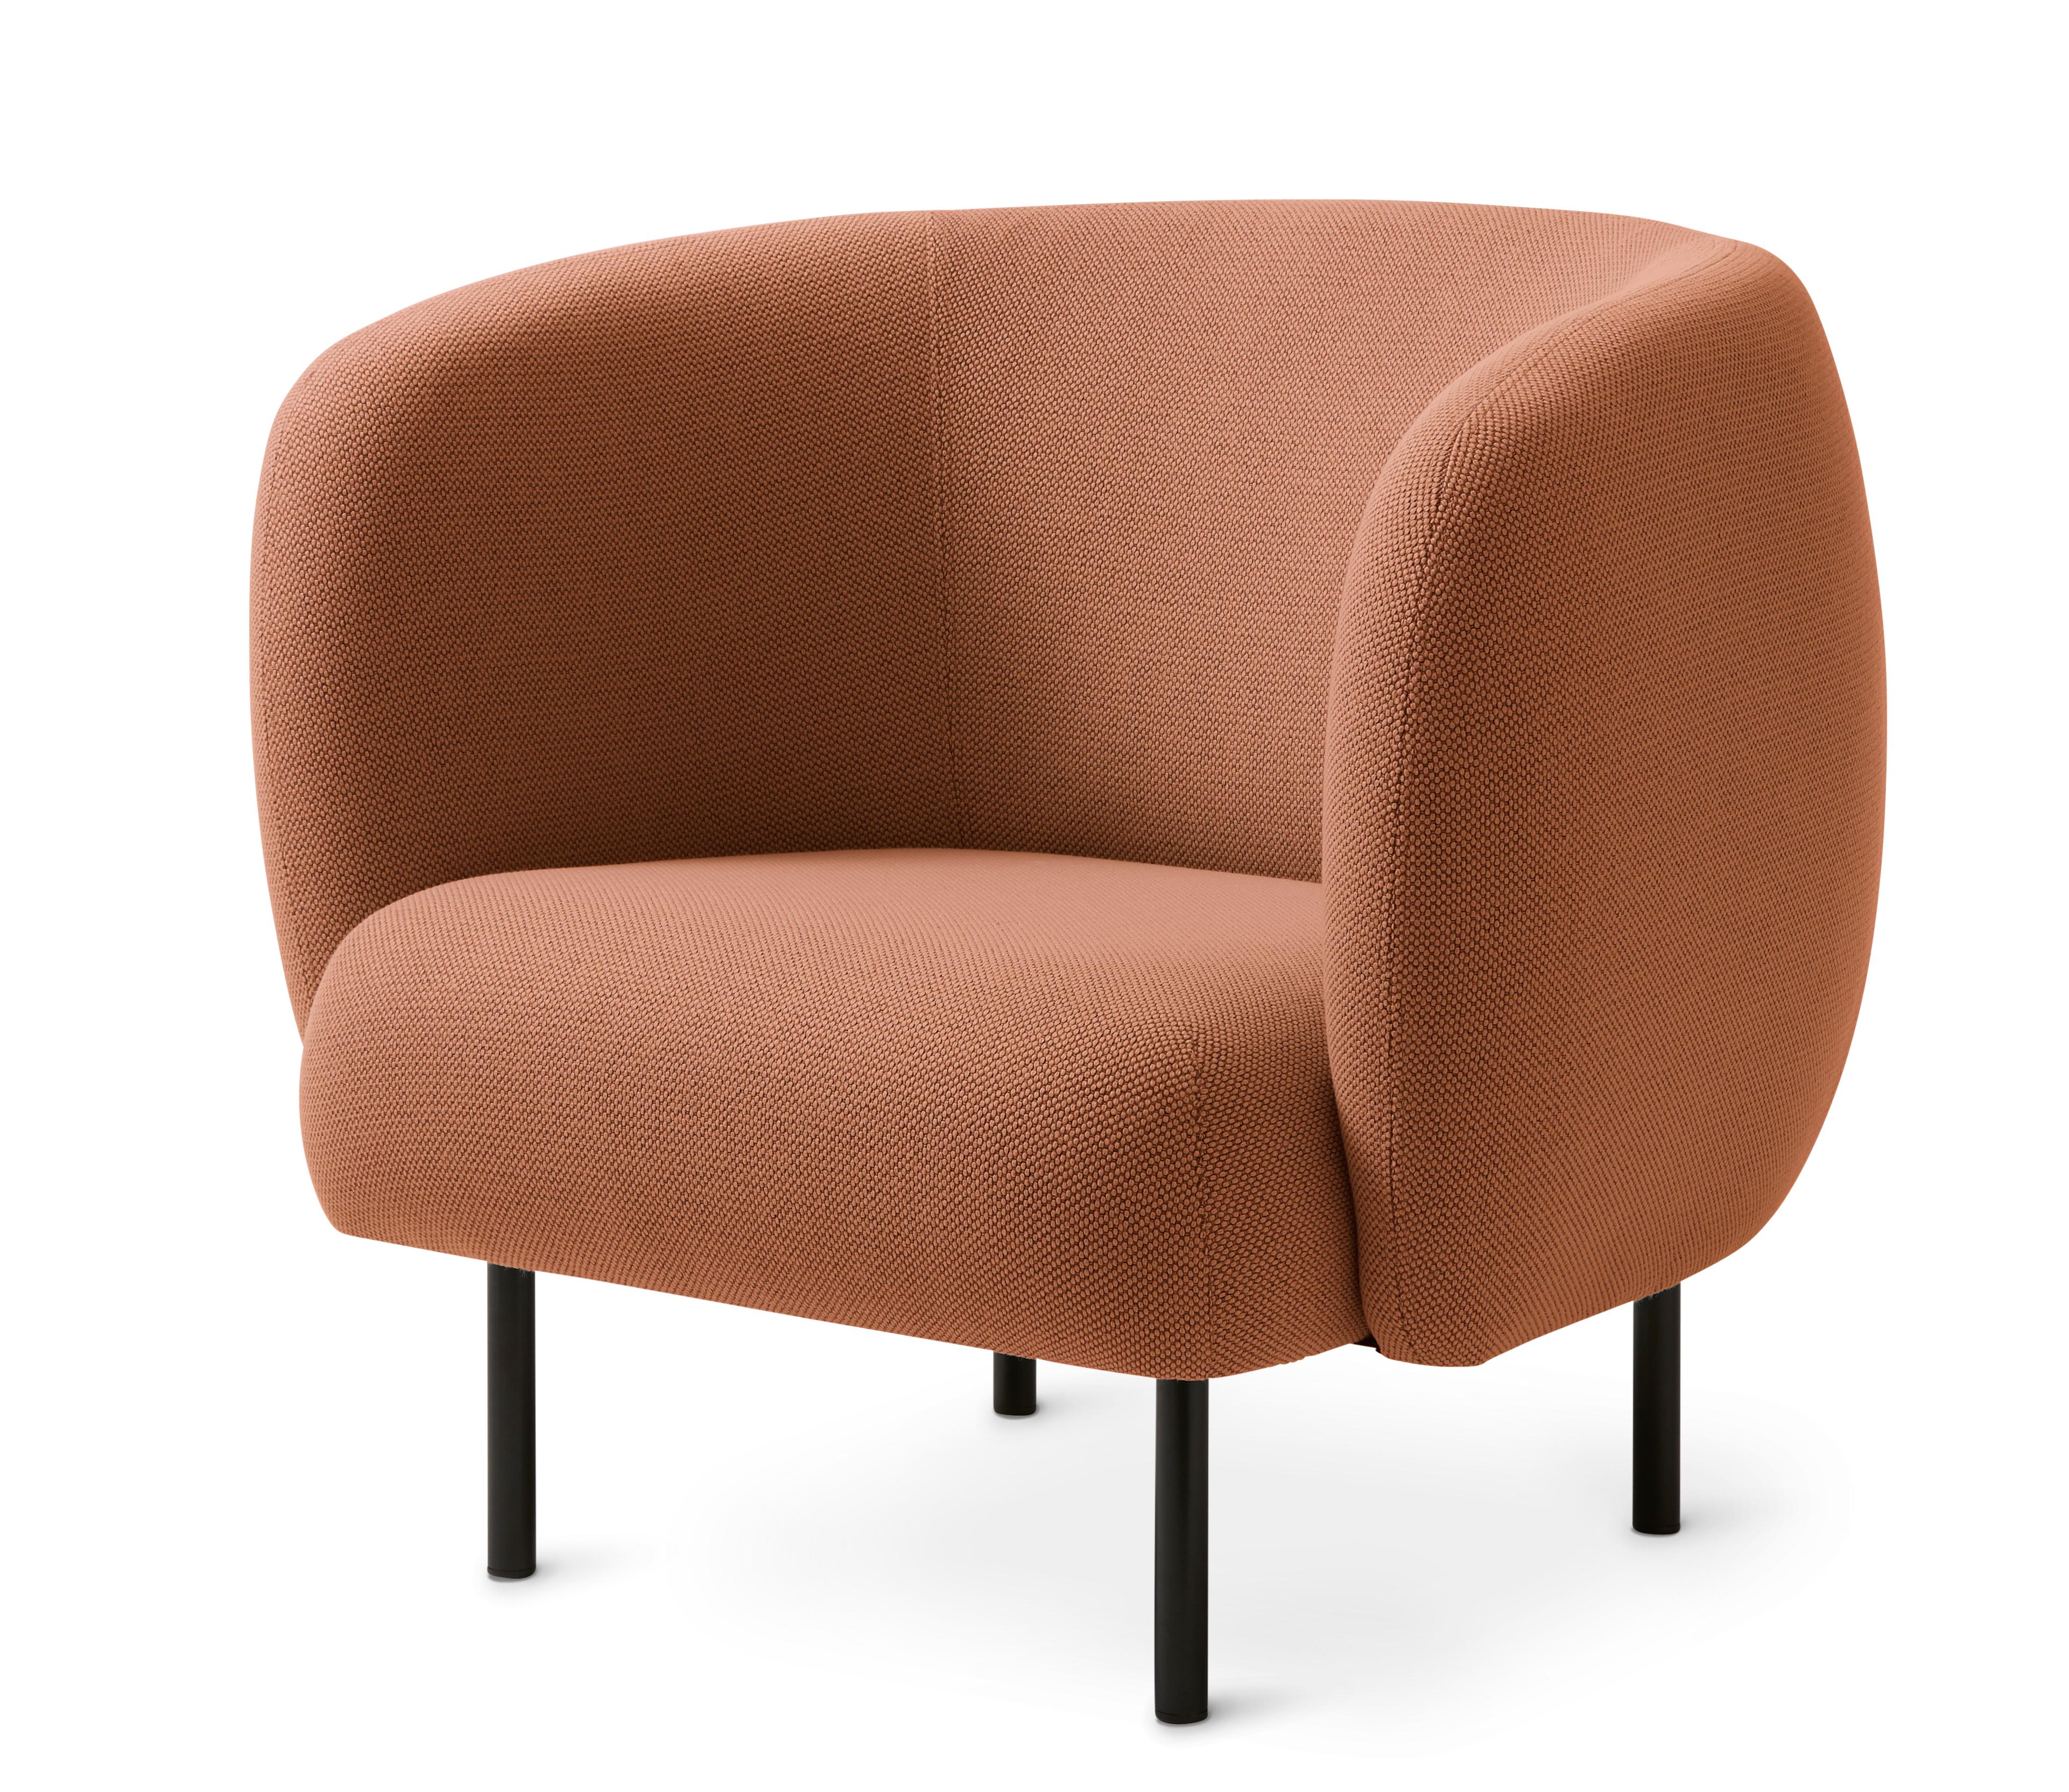 For Sale: Pink (Merit 035) Cape Lounge Chair, by Charlotte Høncke from Warm Nordic 2